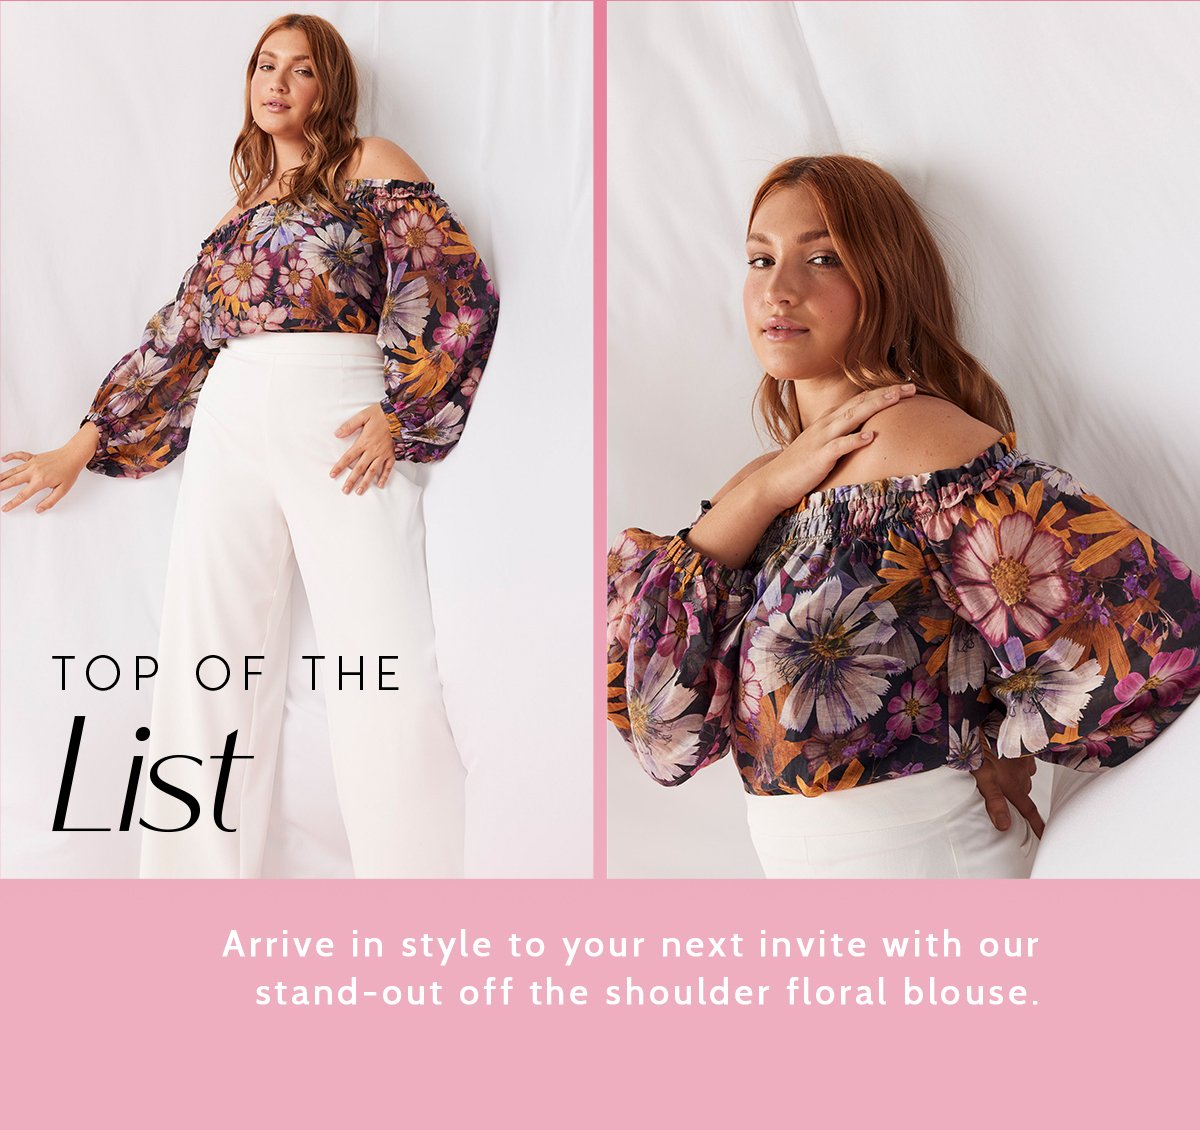 Top Of the List | Arrive in style to your next invite with our stand-out off the shoulder floral blouse.